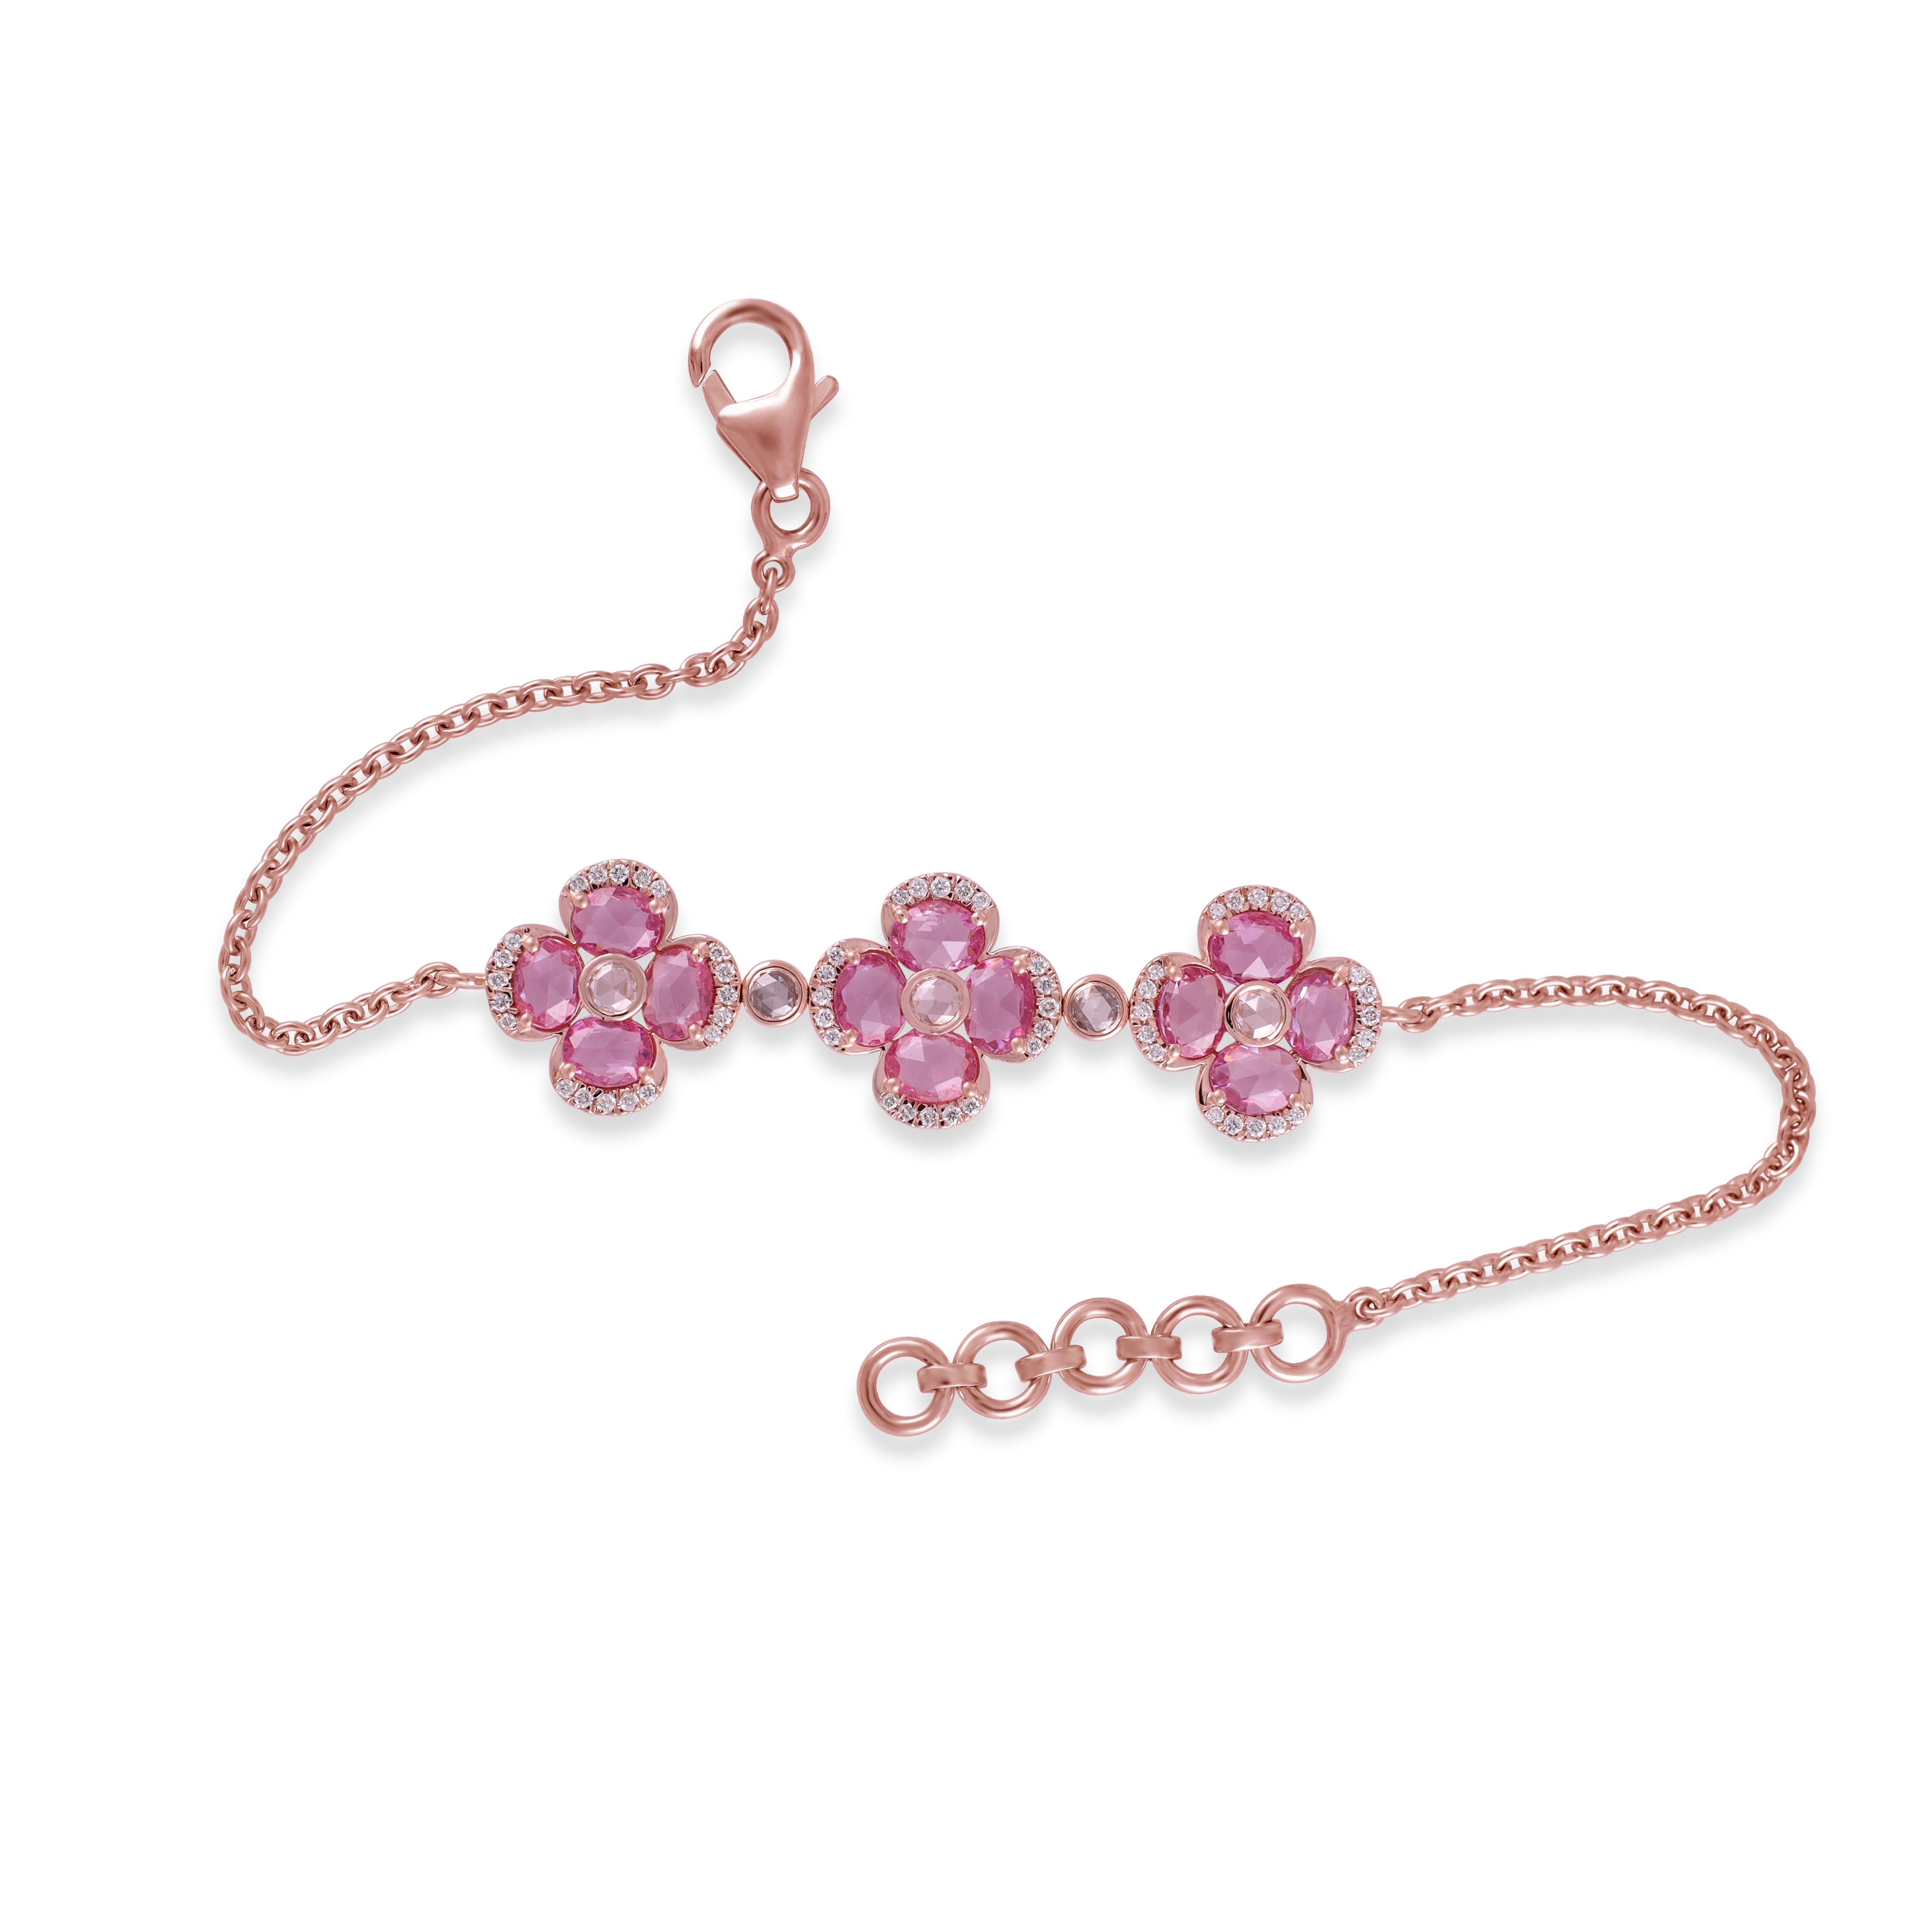 Oval Cut 2.74 Carat Pink Sapphire and Diamond Bracelet in 18k Rose Gold For Sale